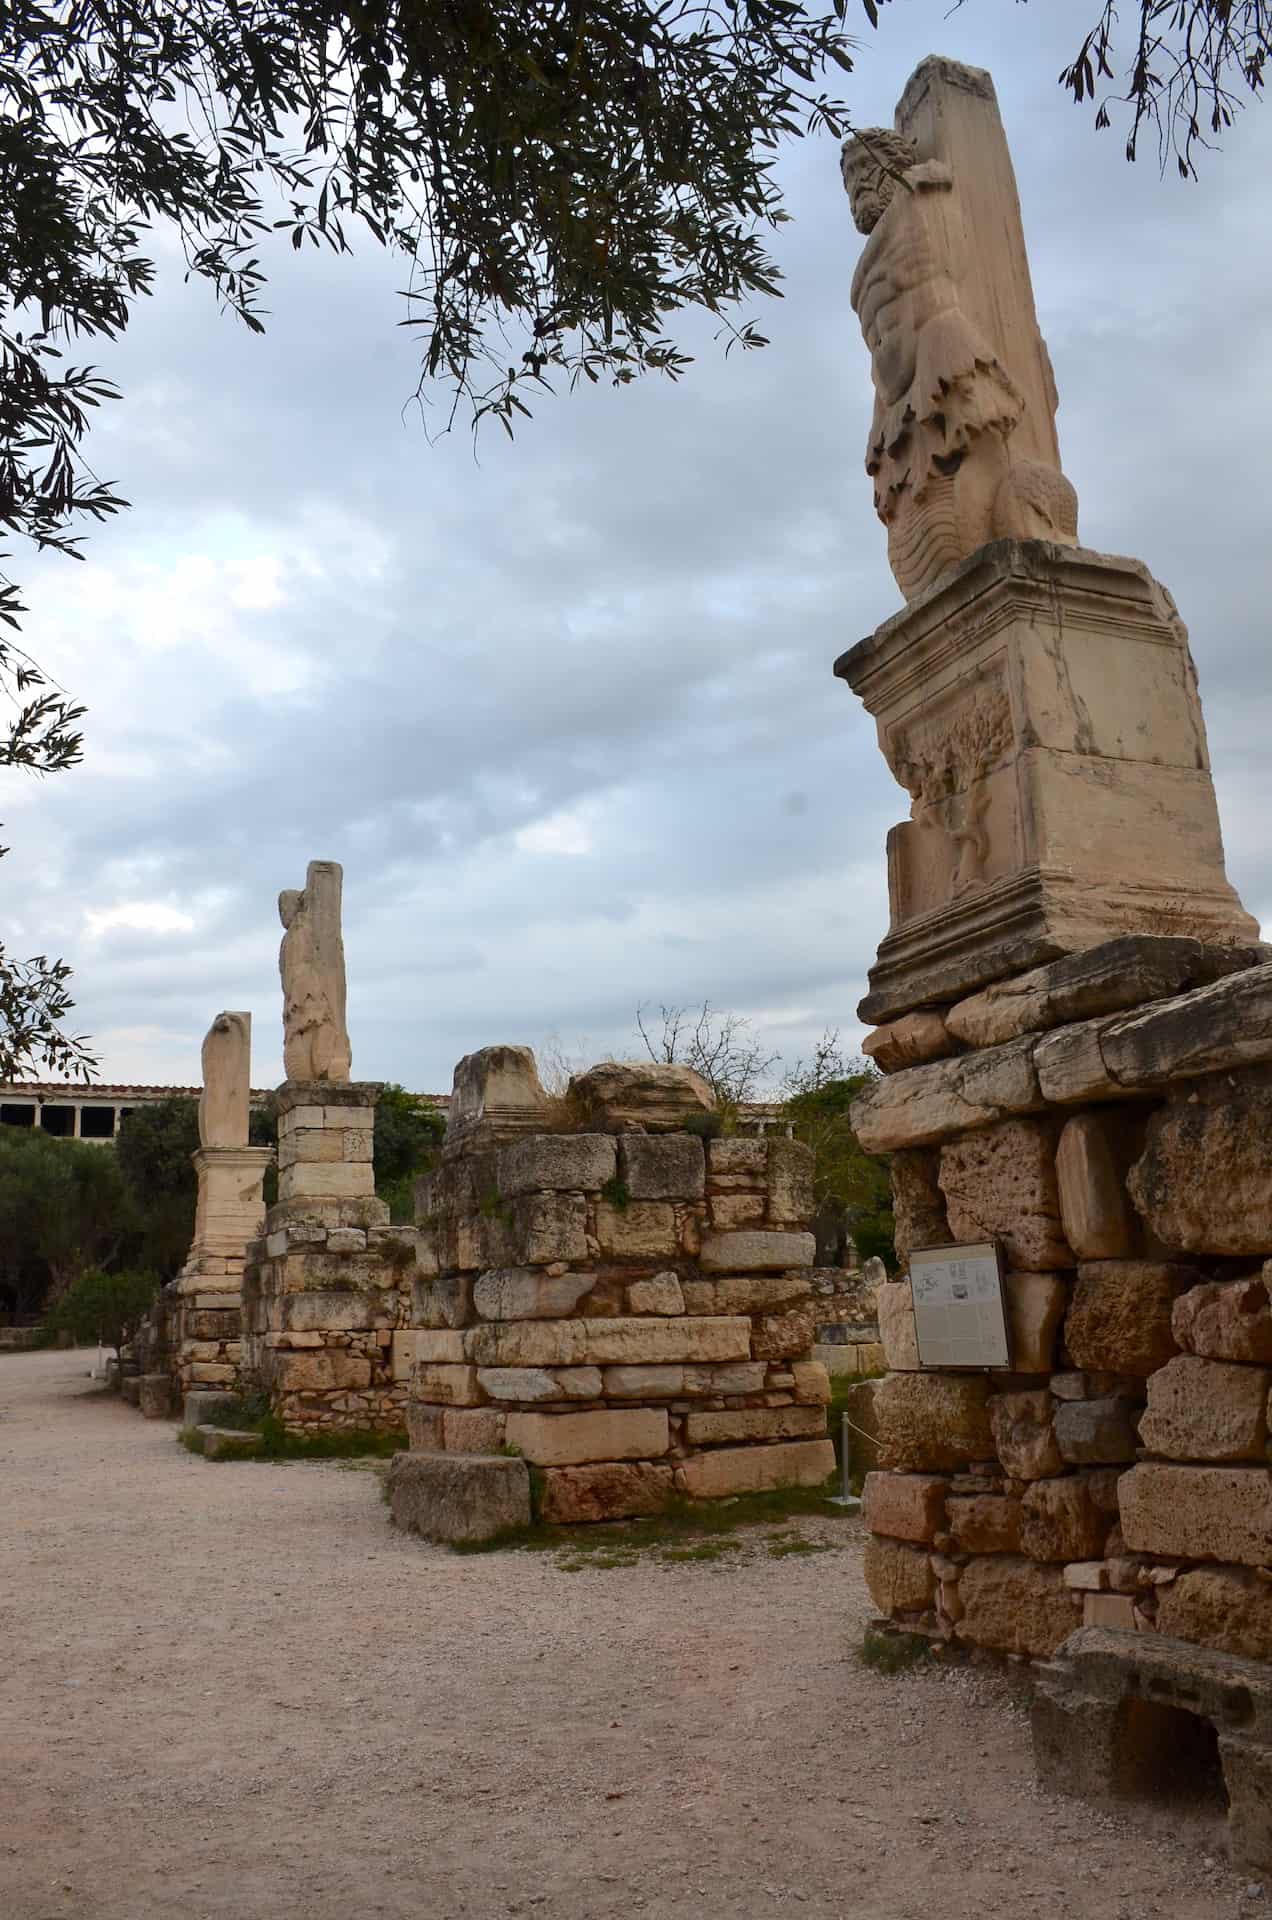 Sculptures on the north stoa of the Odeon of Agrippa